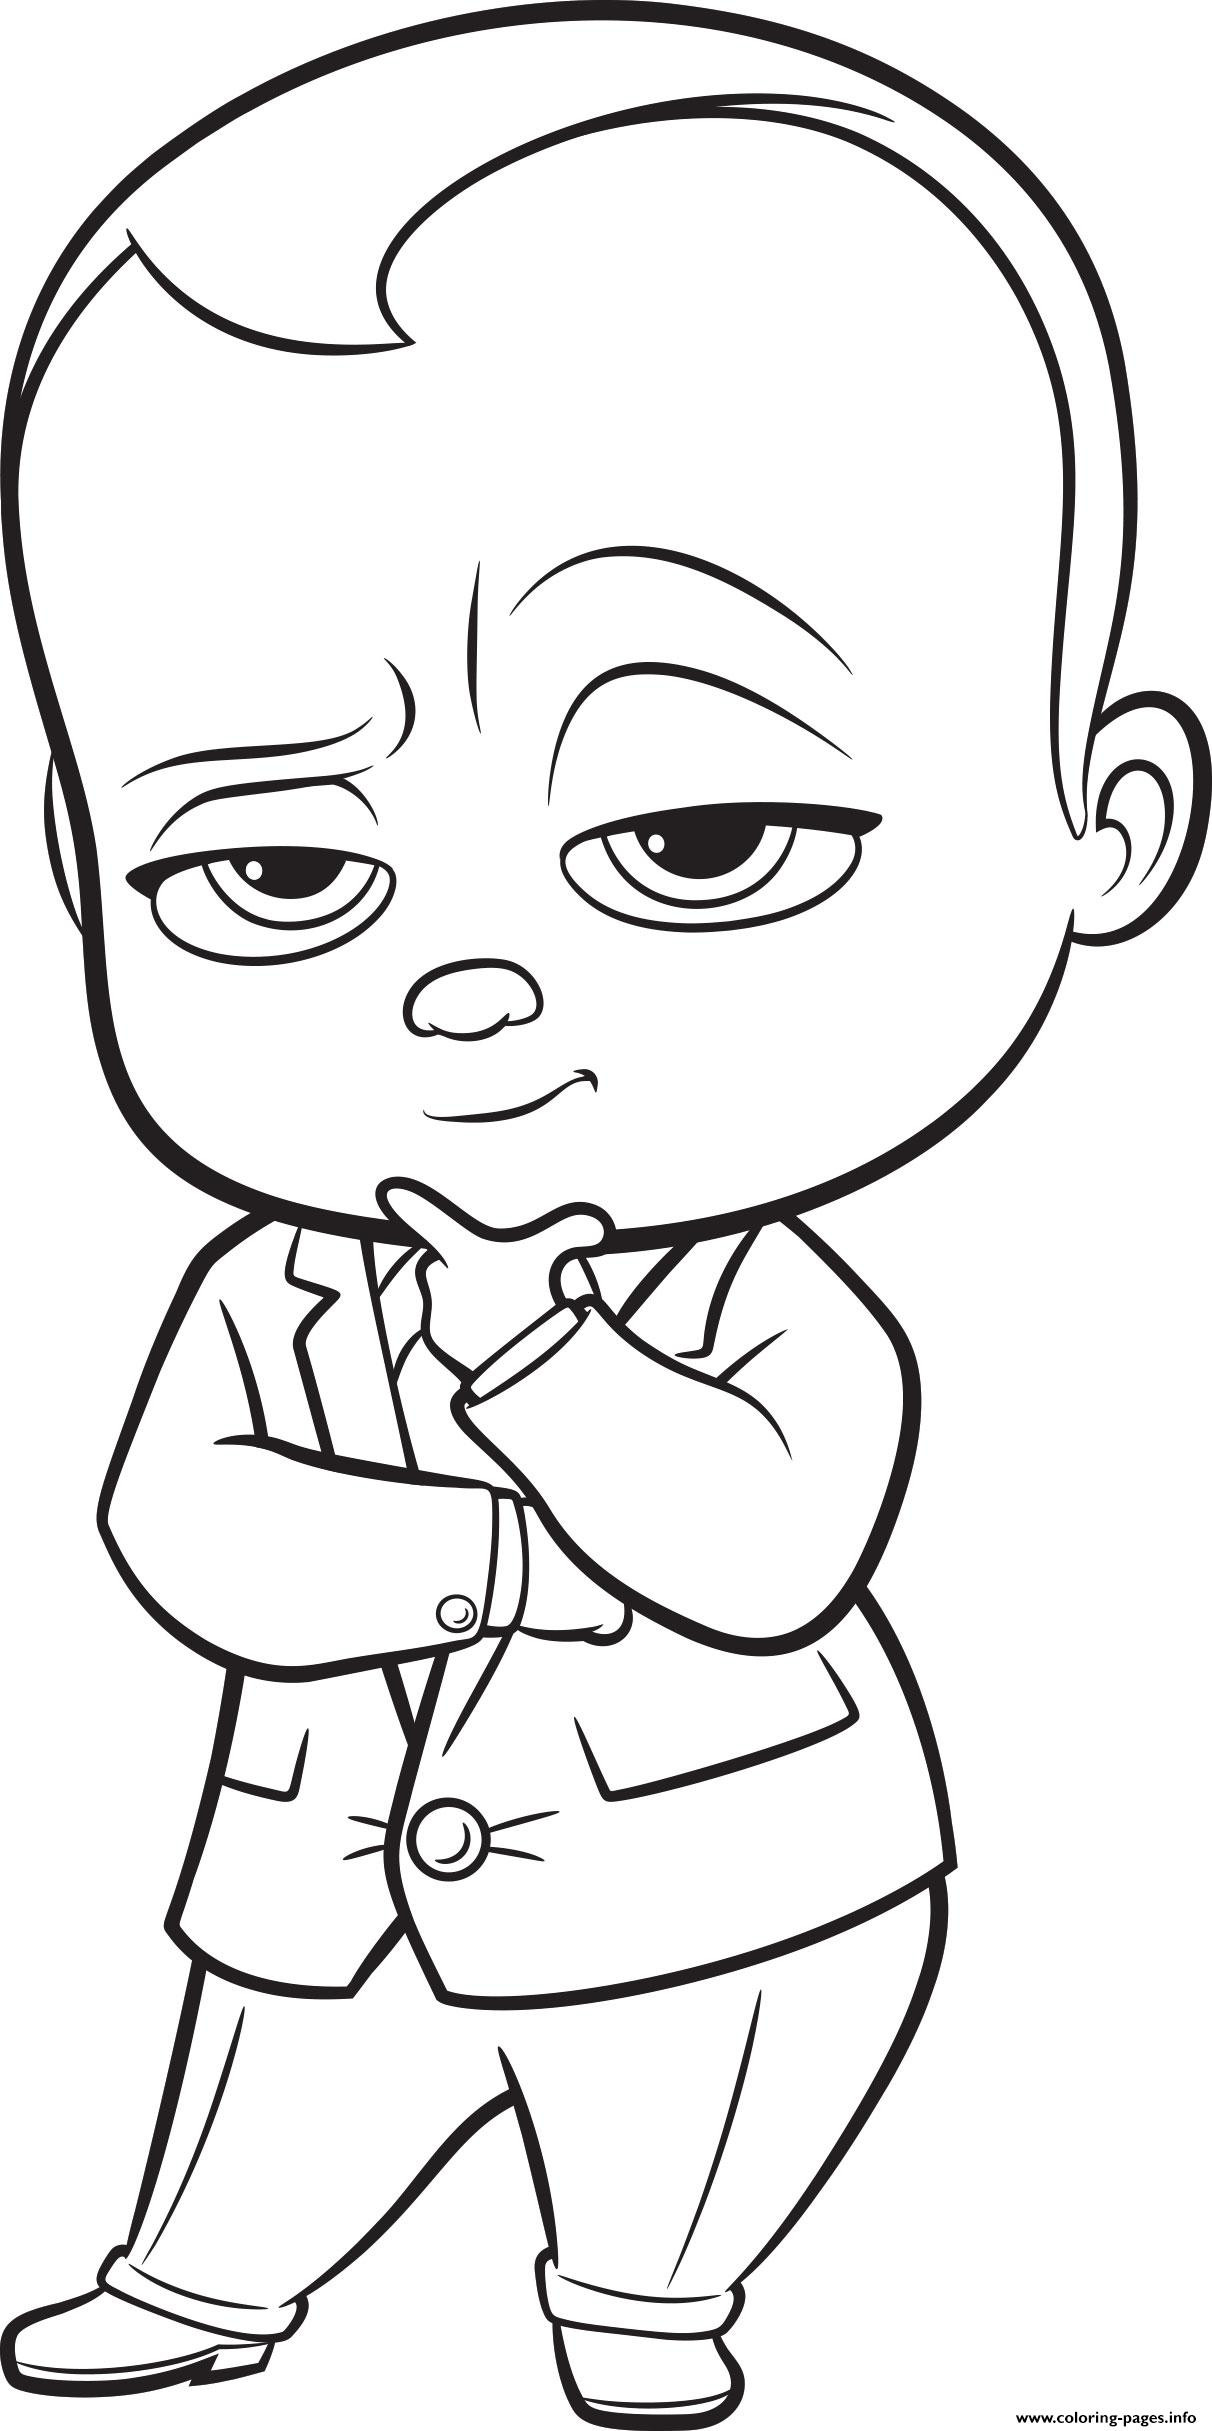 Coloring Pages Of Babies
 The Boss Baby Colouring Coloring Pages Printable